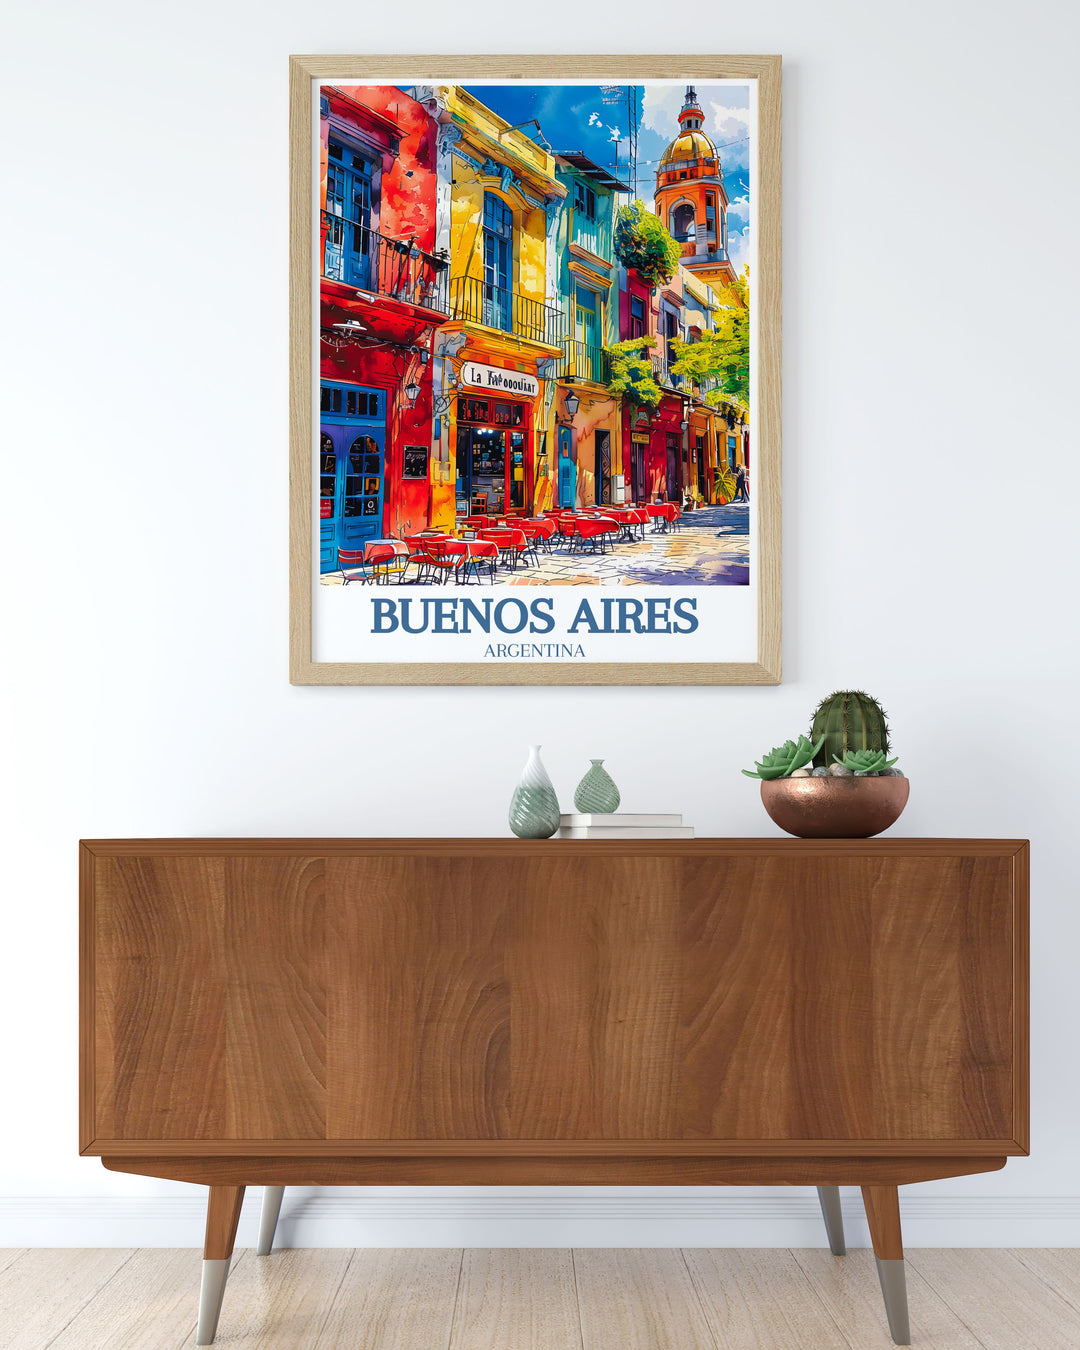 The captivating blend of nature in Buenos Aires and the historic streets of Caminito is beautifully illustrated in this poster, making it a stunning addition to any wall art collection celebrating Argentina.